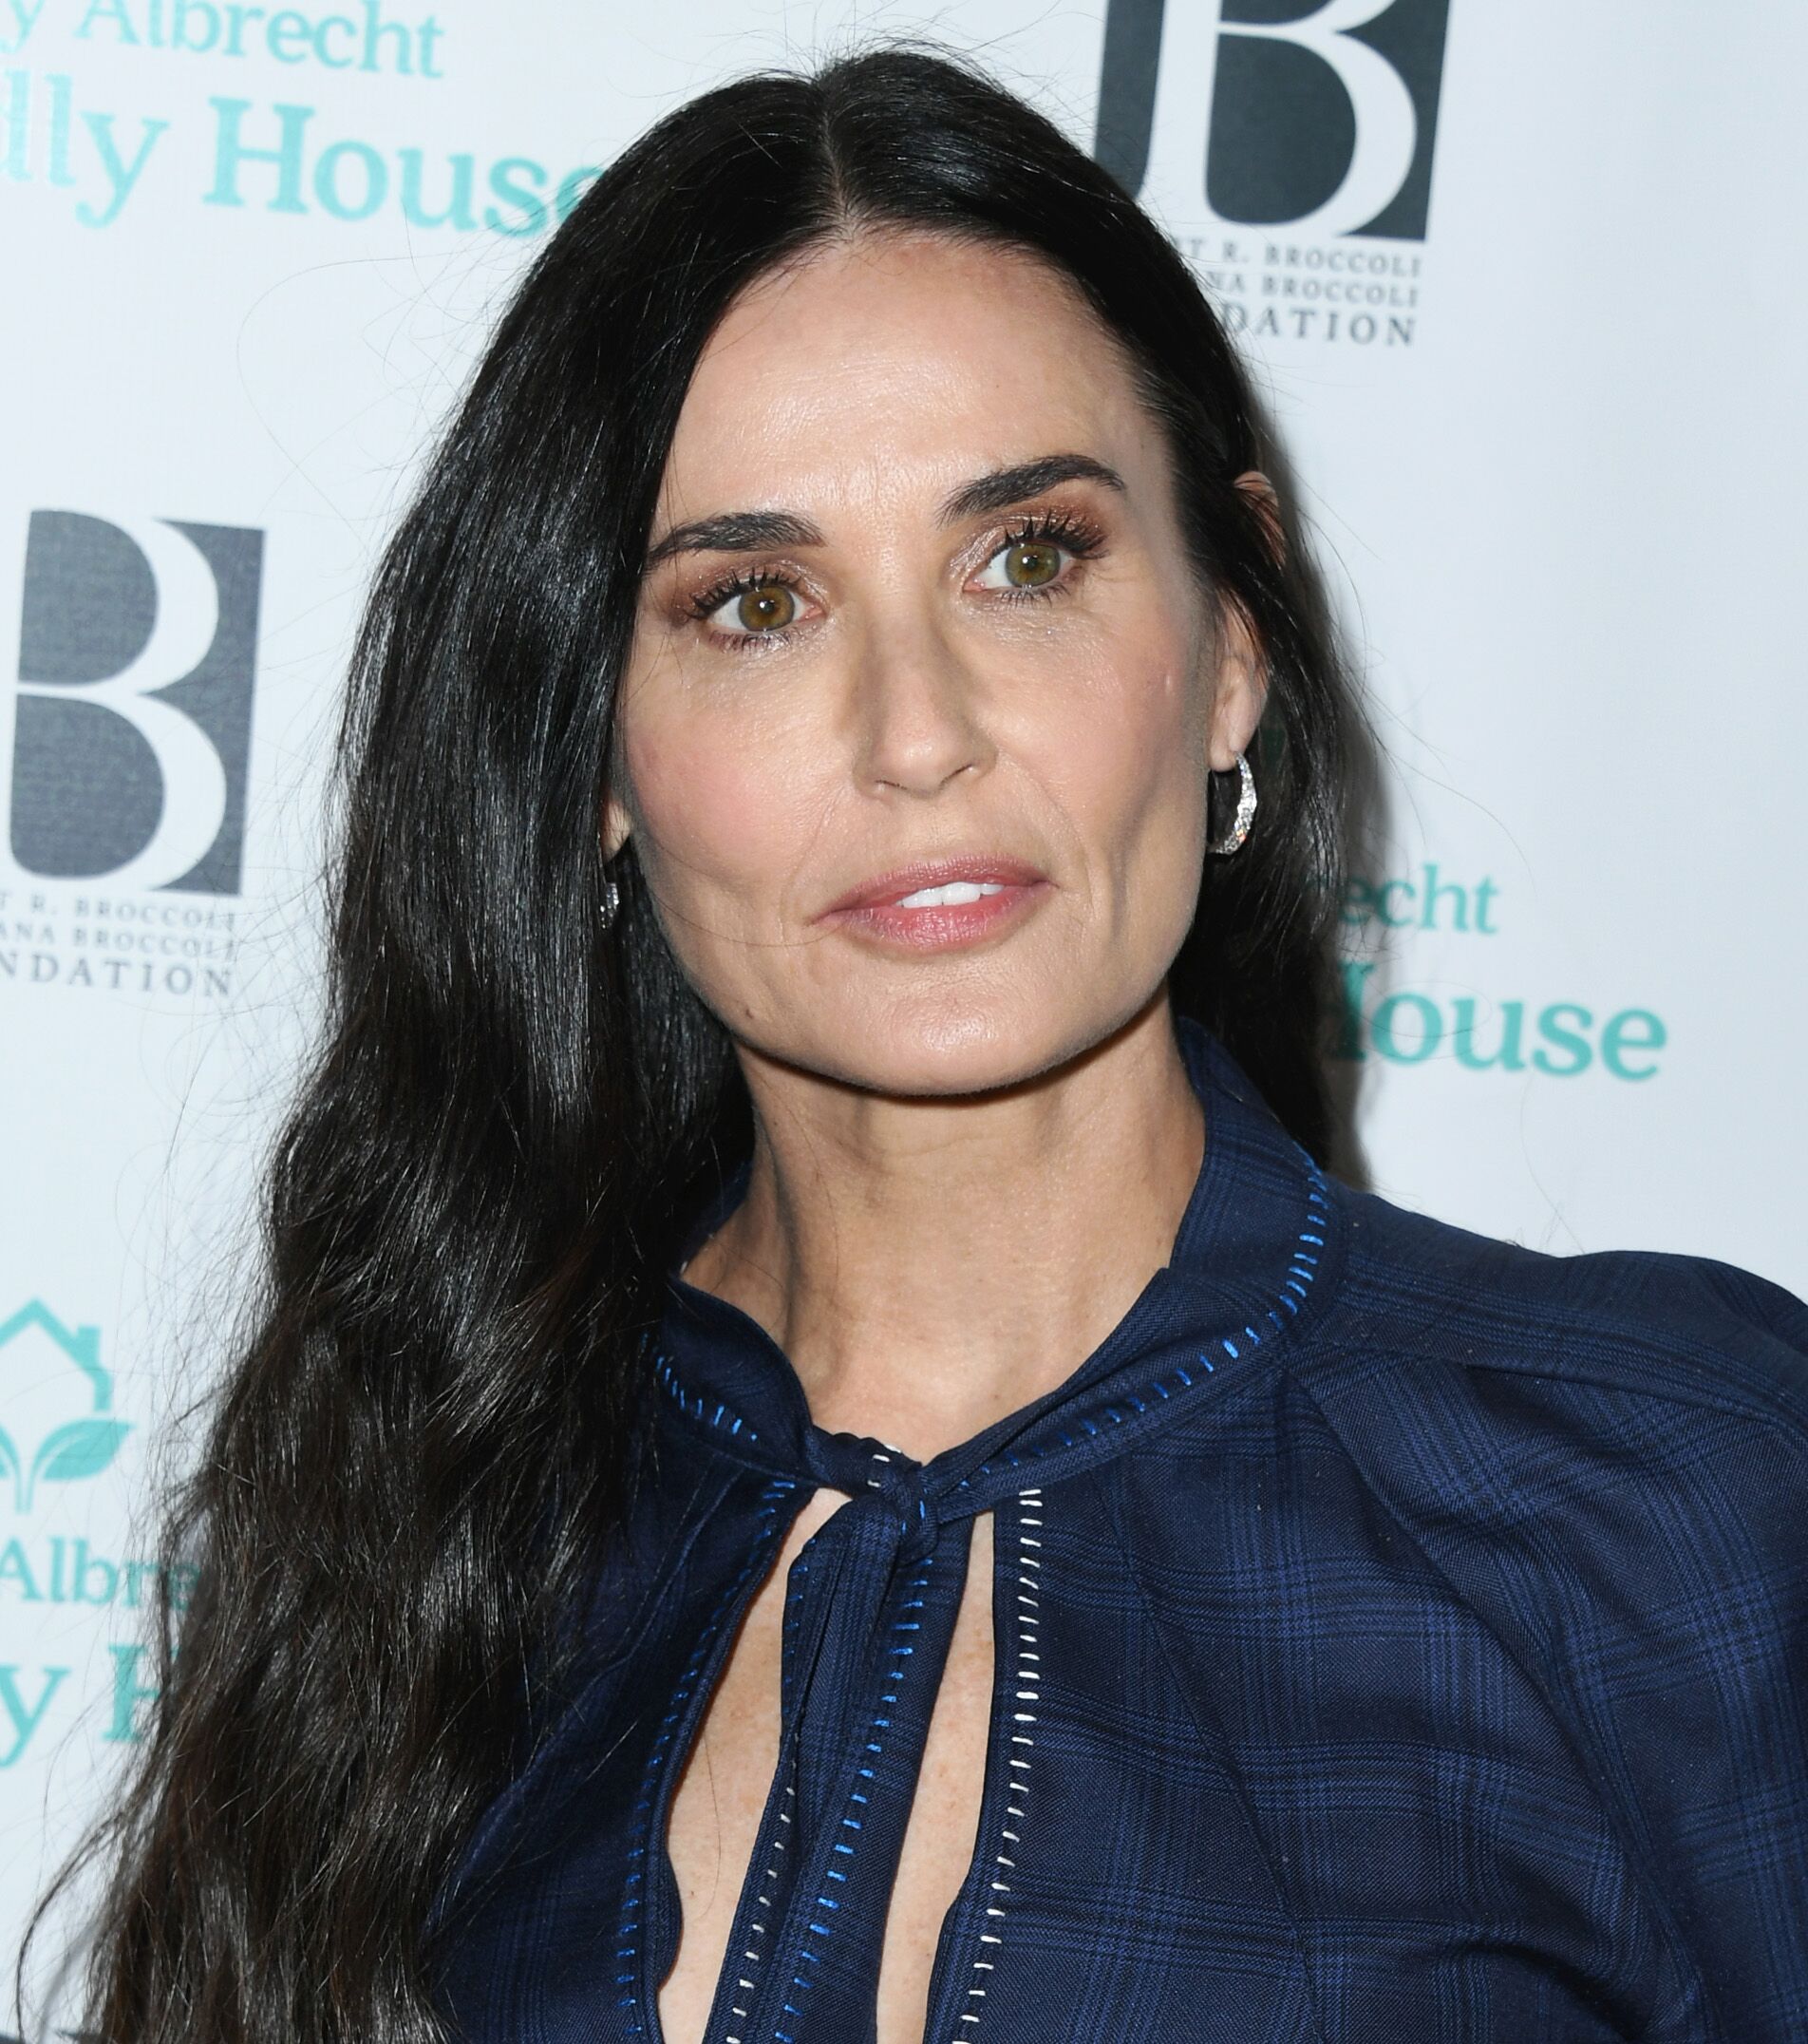 Demi Moore attends Friendly House 30th Annual Awards Luncheon at The Beverly Hilton Hotel. | Source: Getty Images